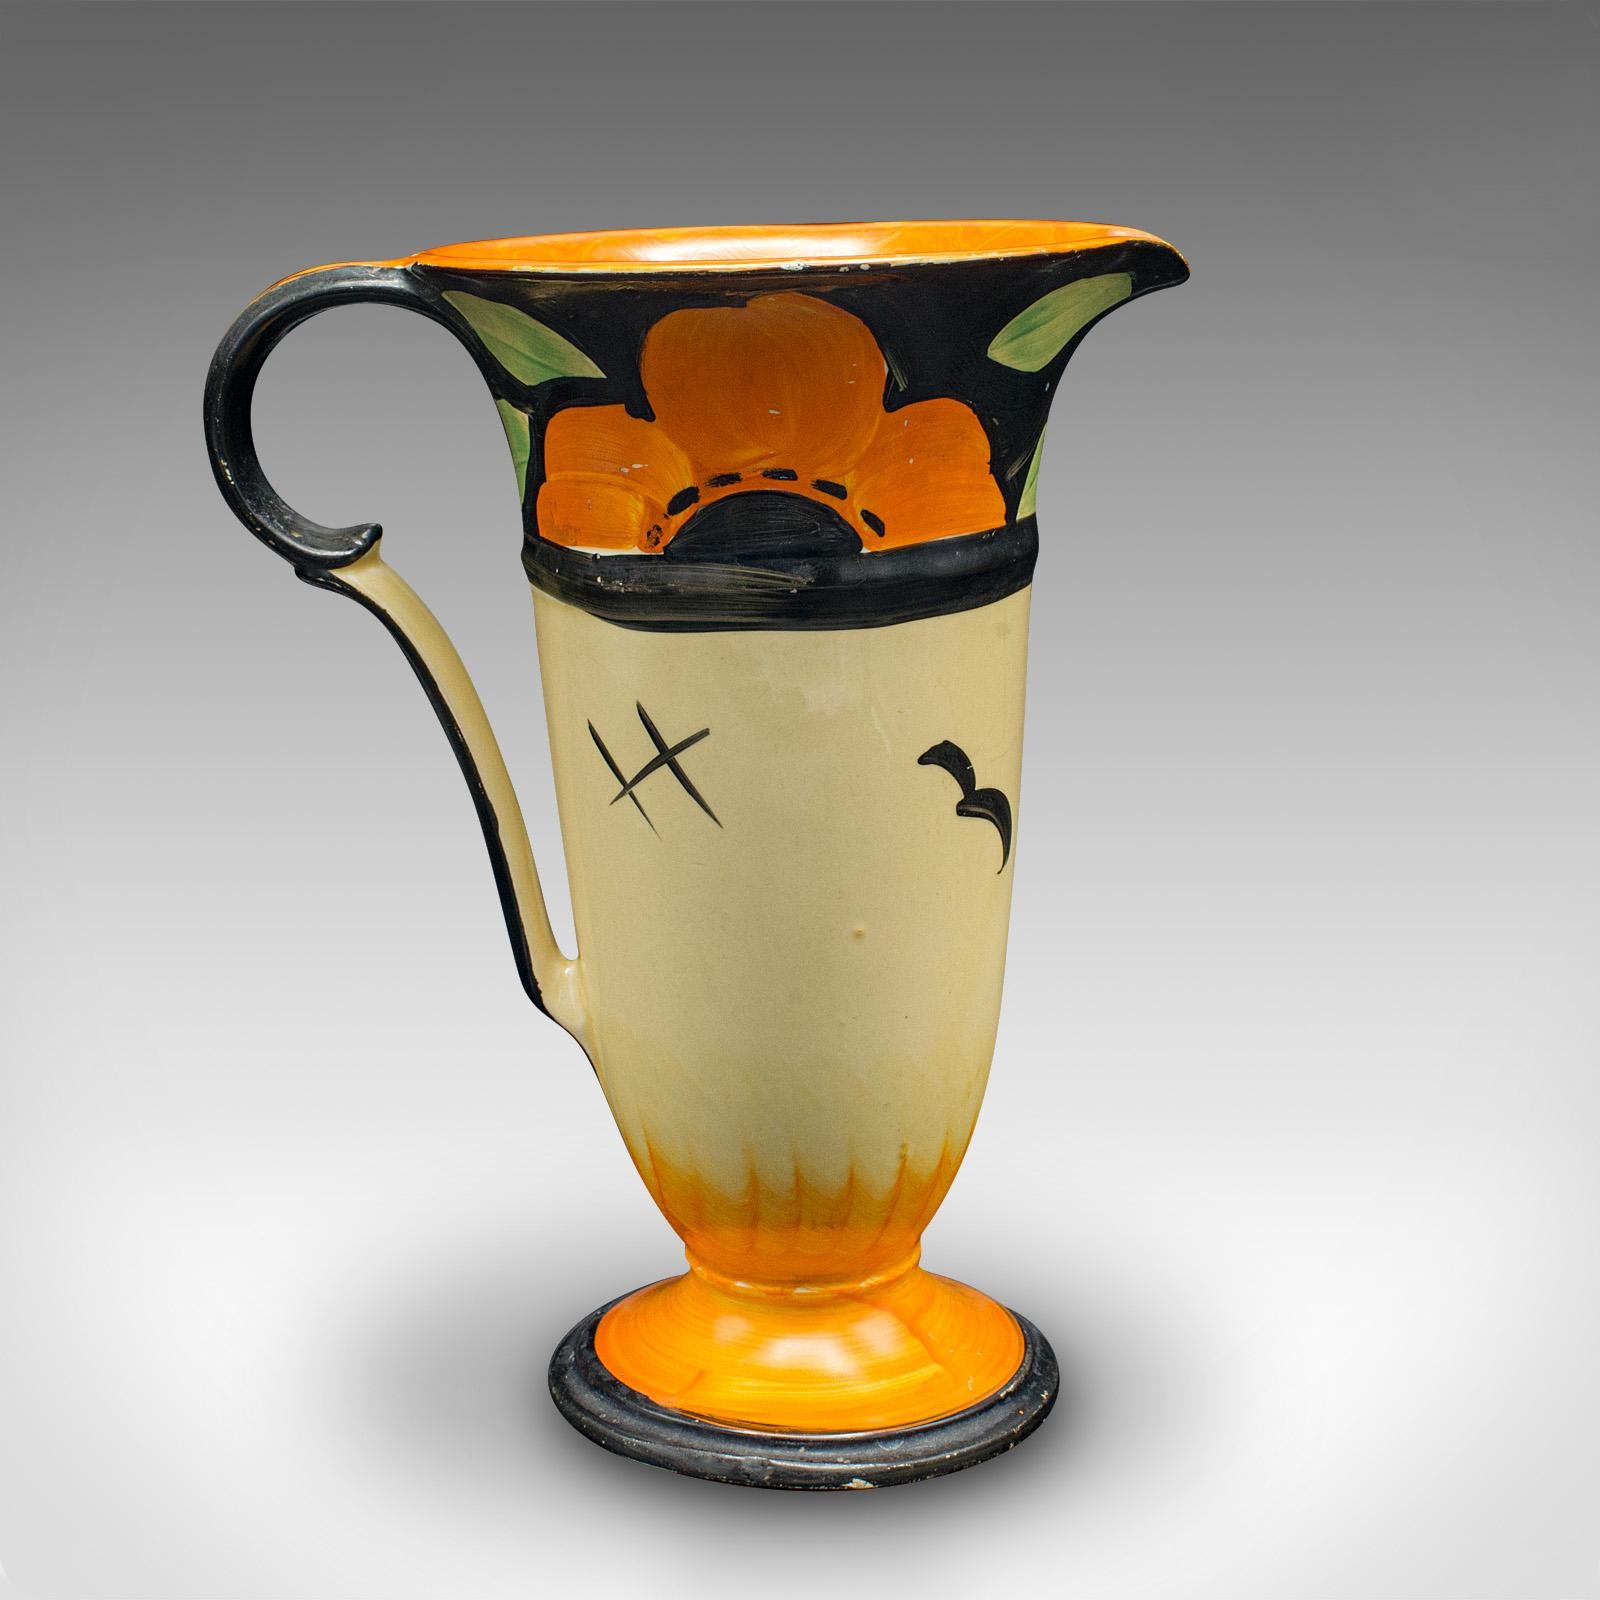 This is a vintage serving jug. An English, ceramic pourer in Art Deco taste, dating to the early 20th century, circa 1930.

Vibrant and appealing jug with wonderful Art Deco taste
Displaying a desirable aged patina and in good order
Quality ceramic